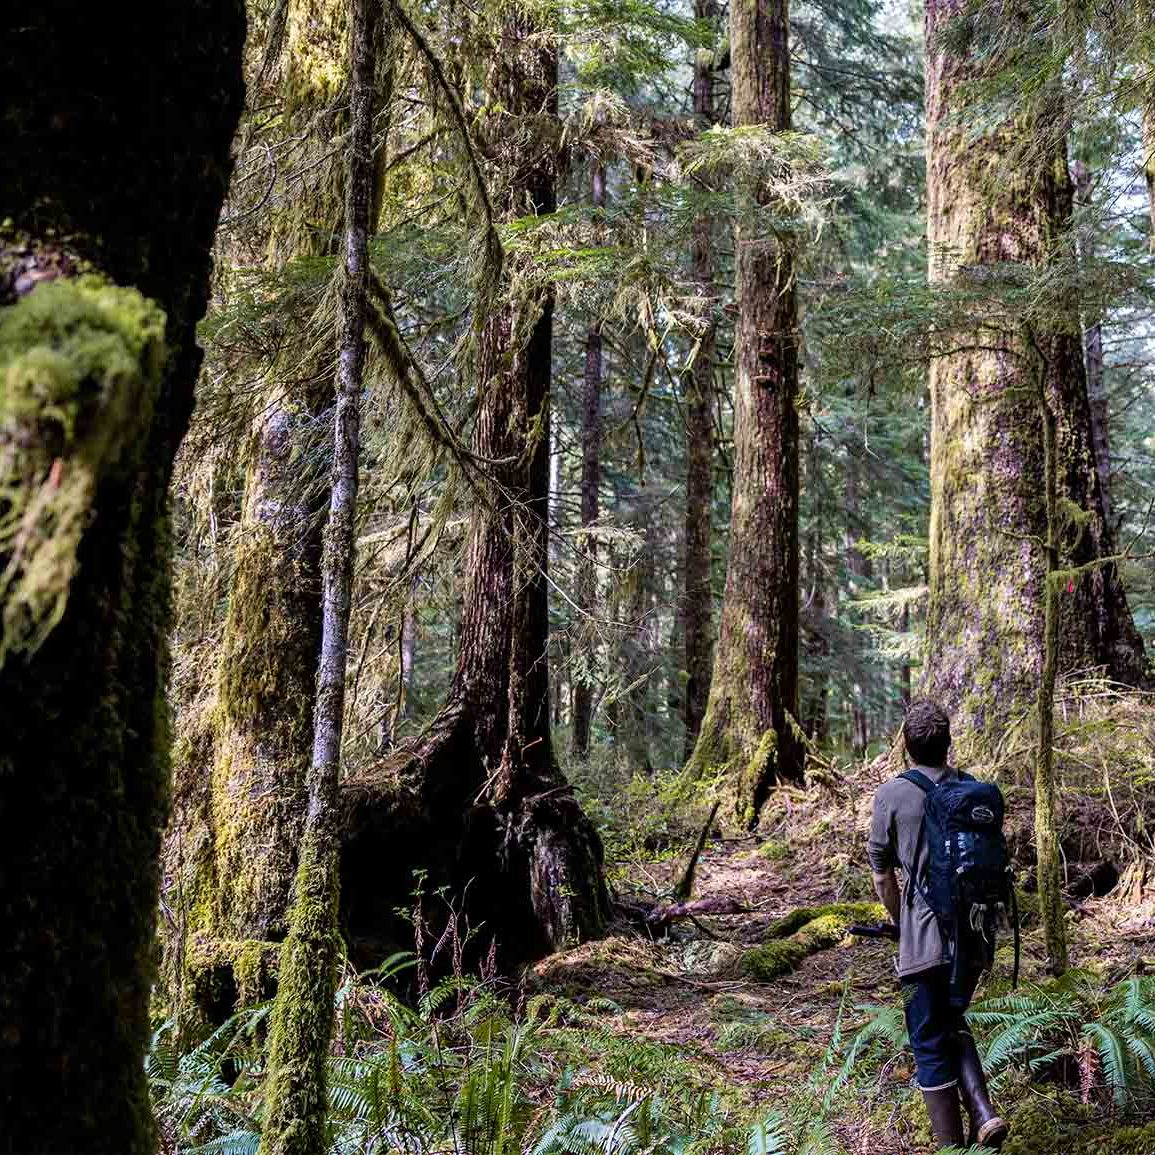 Man walking through an old growth forest.